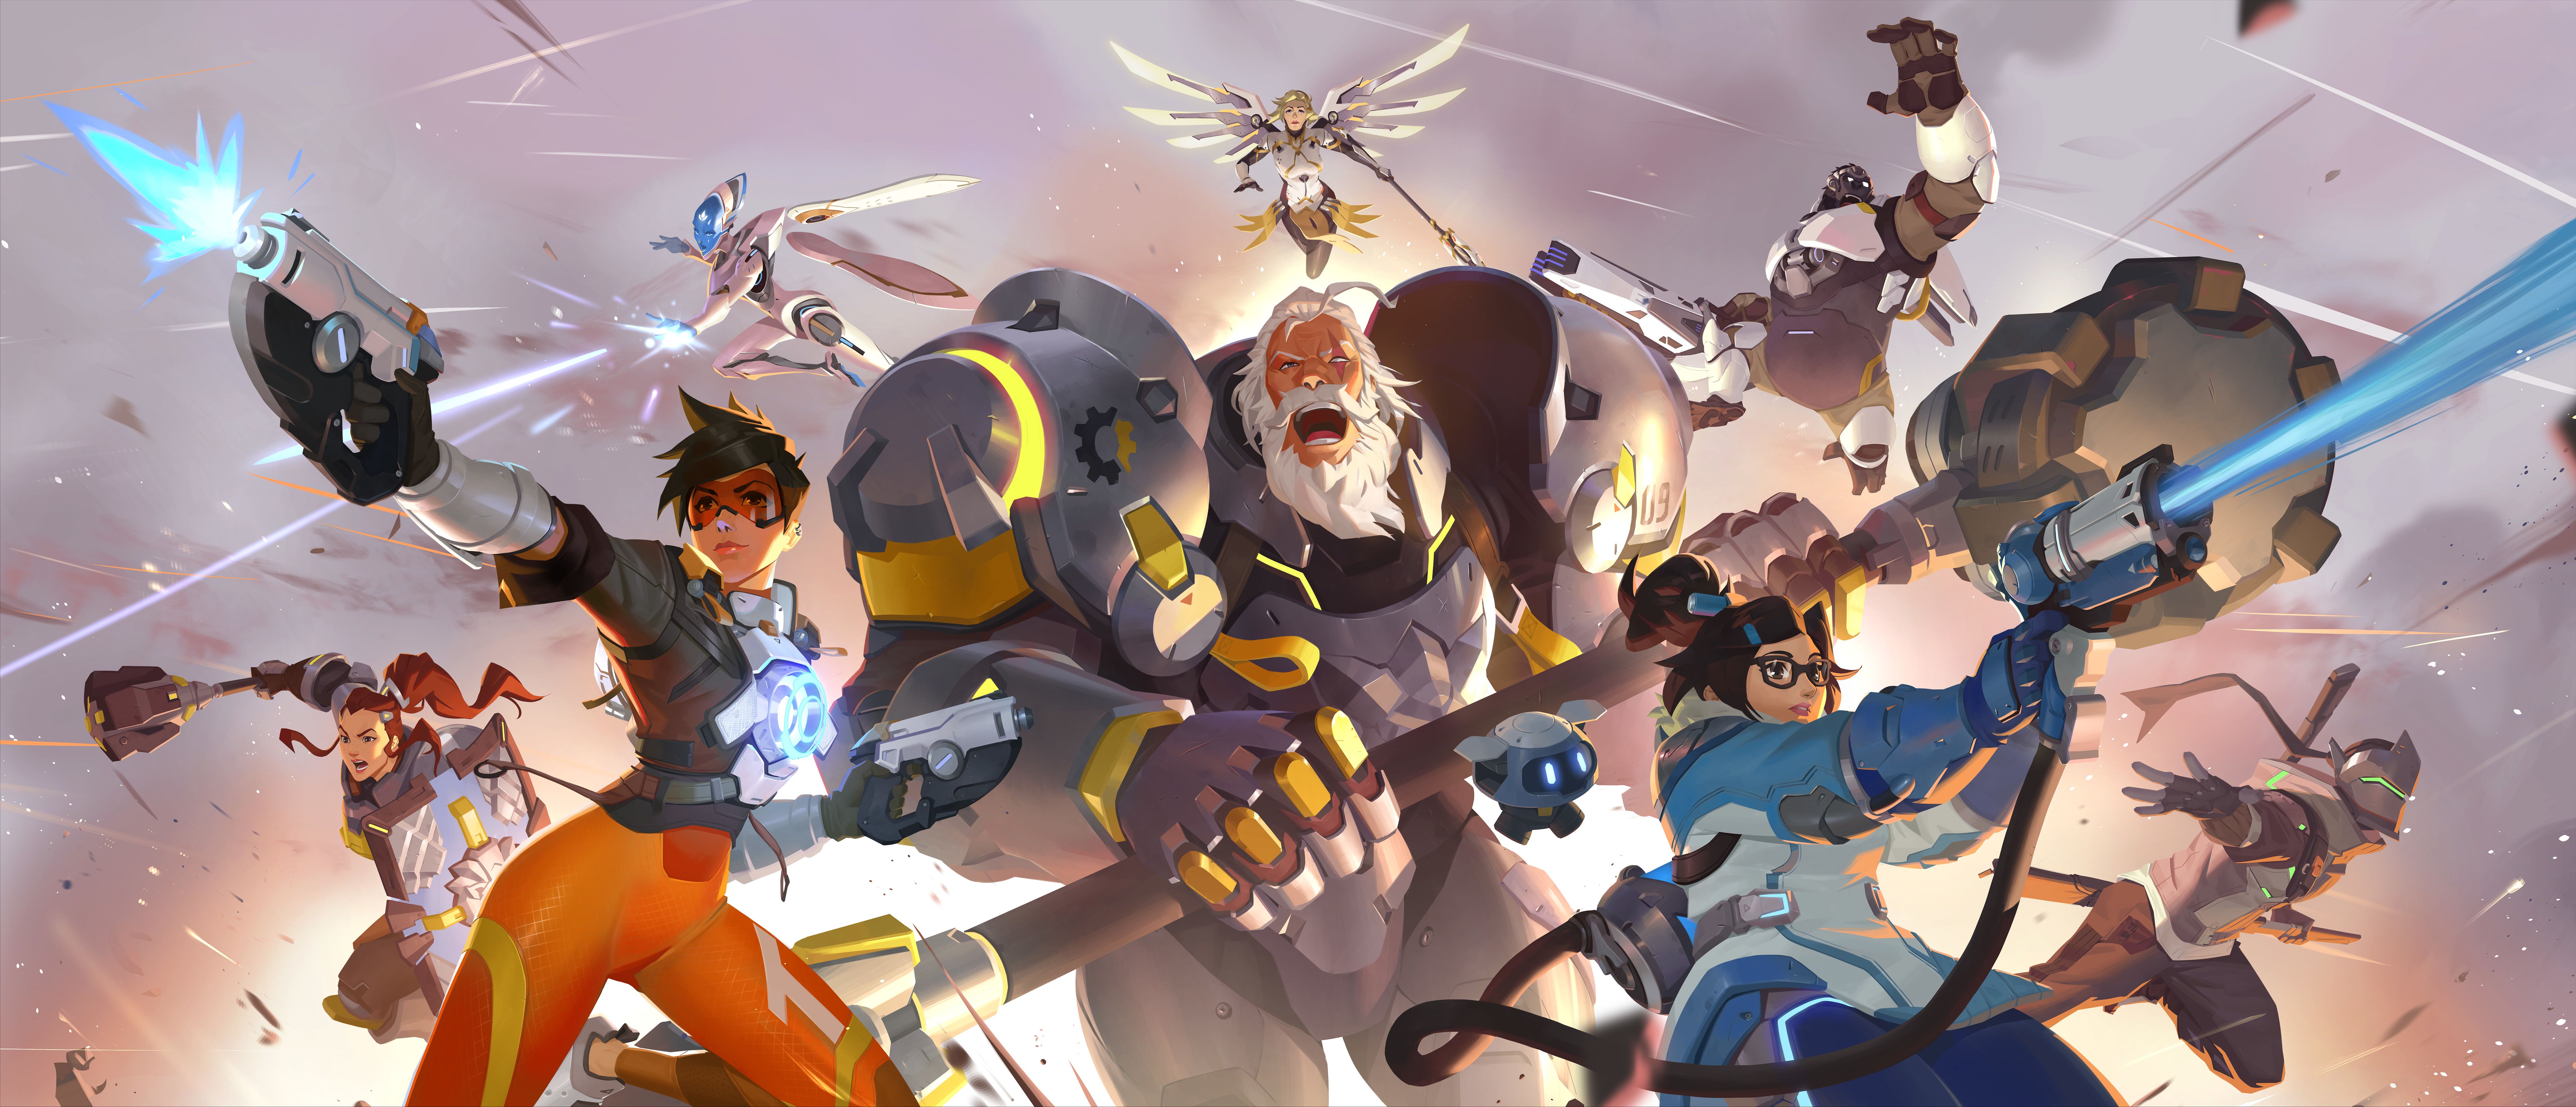 Top 13 Overwatch Wallpapers in Full HD and 4K